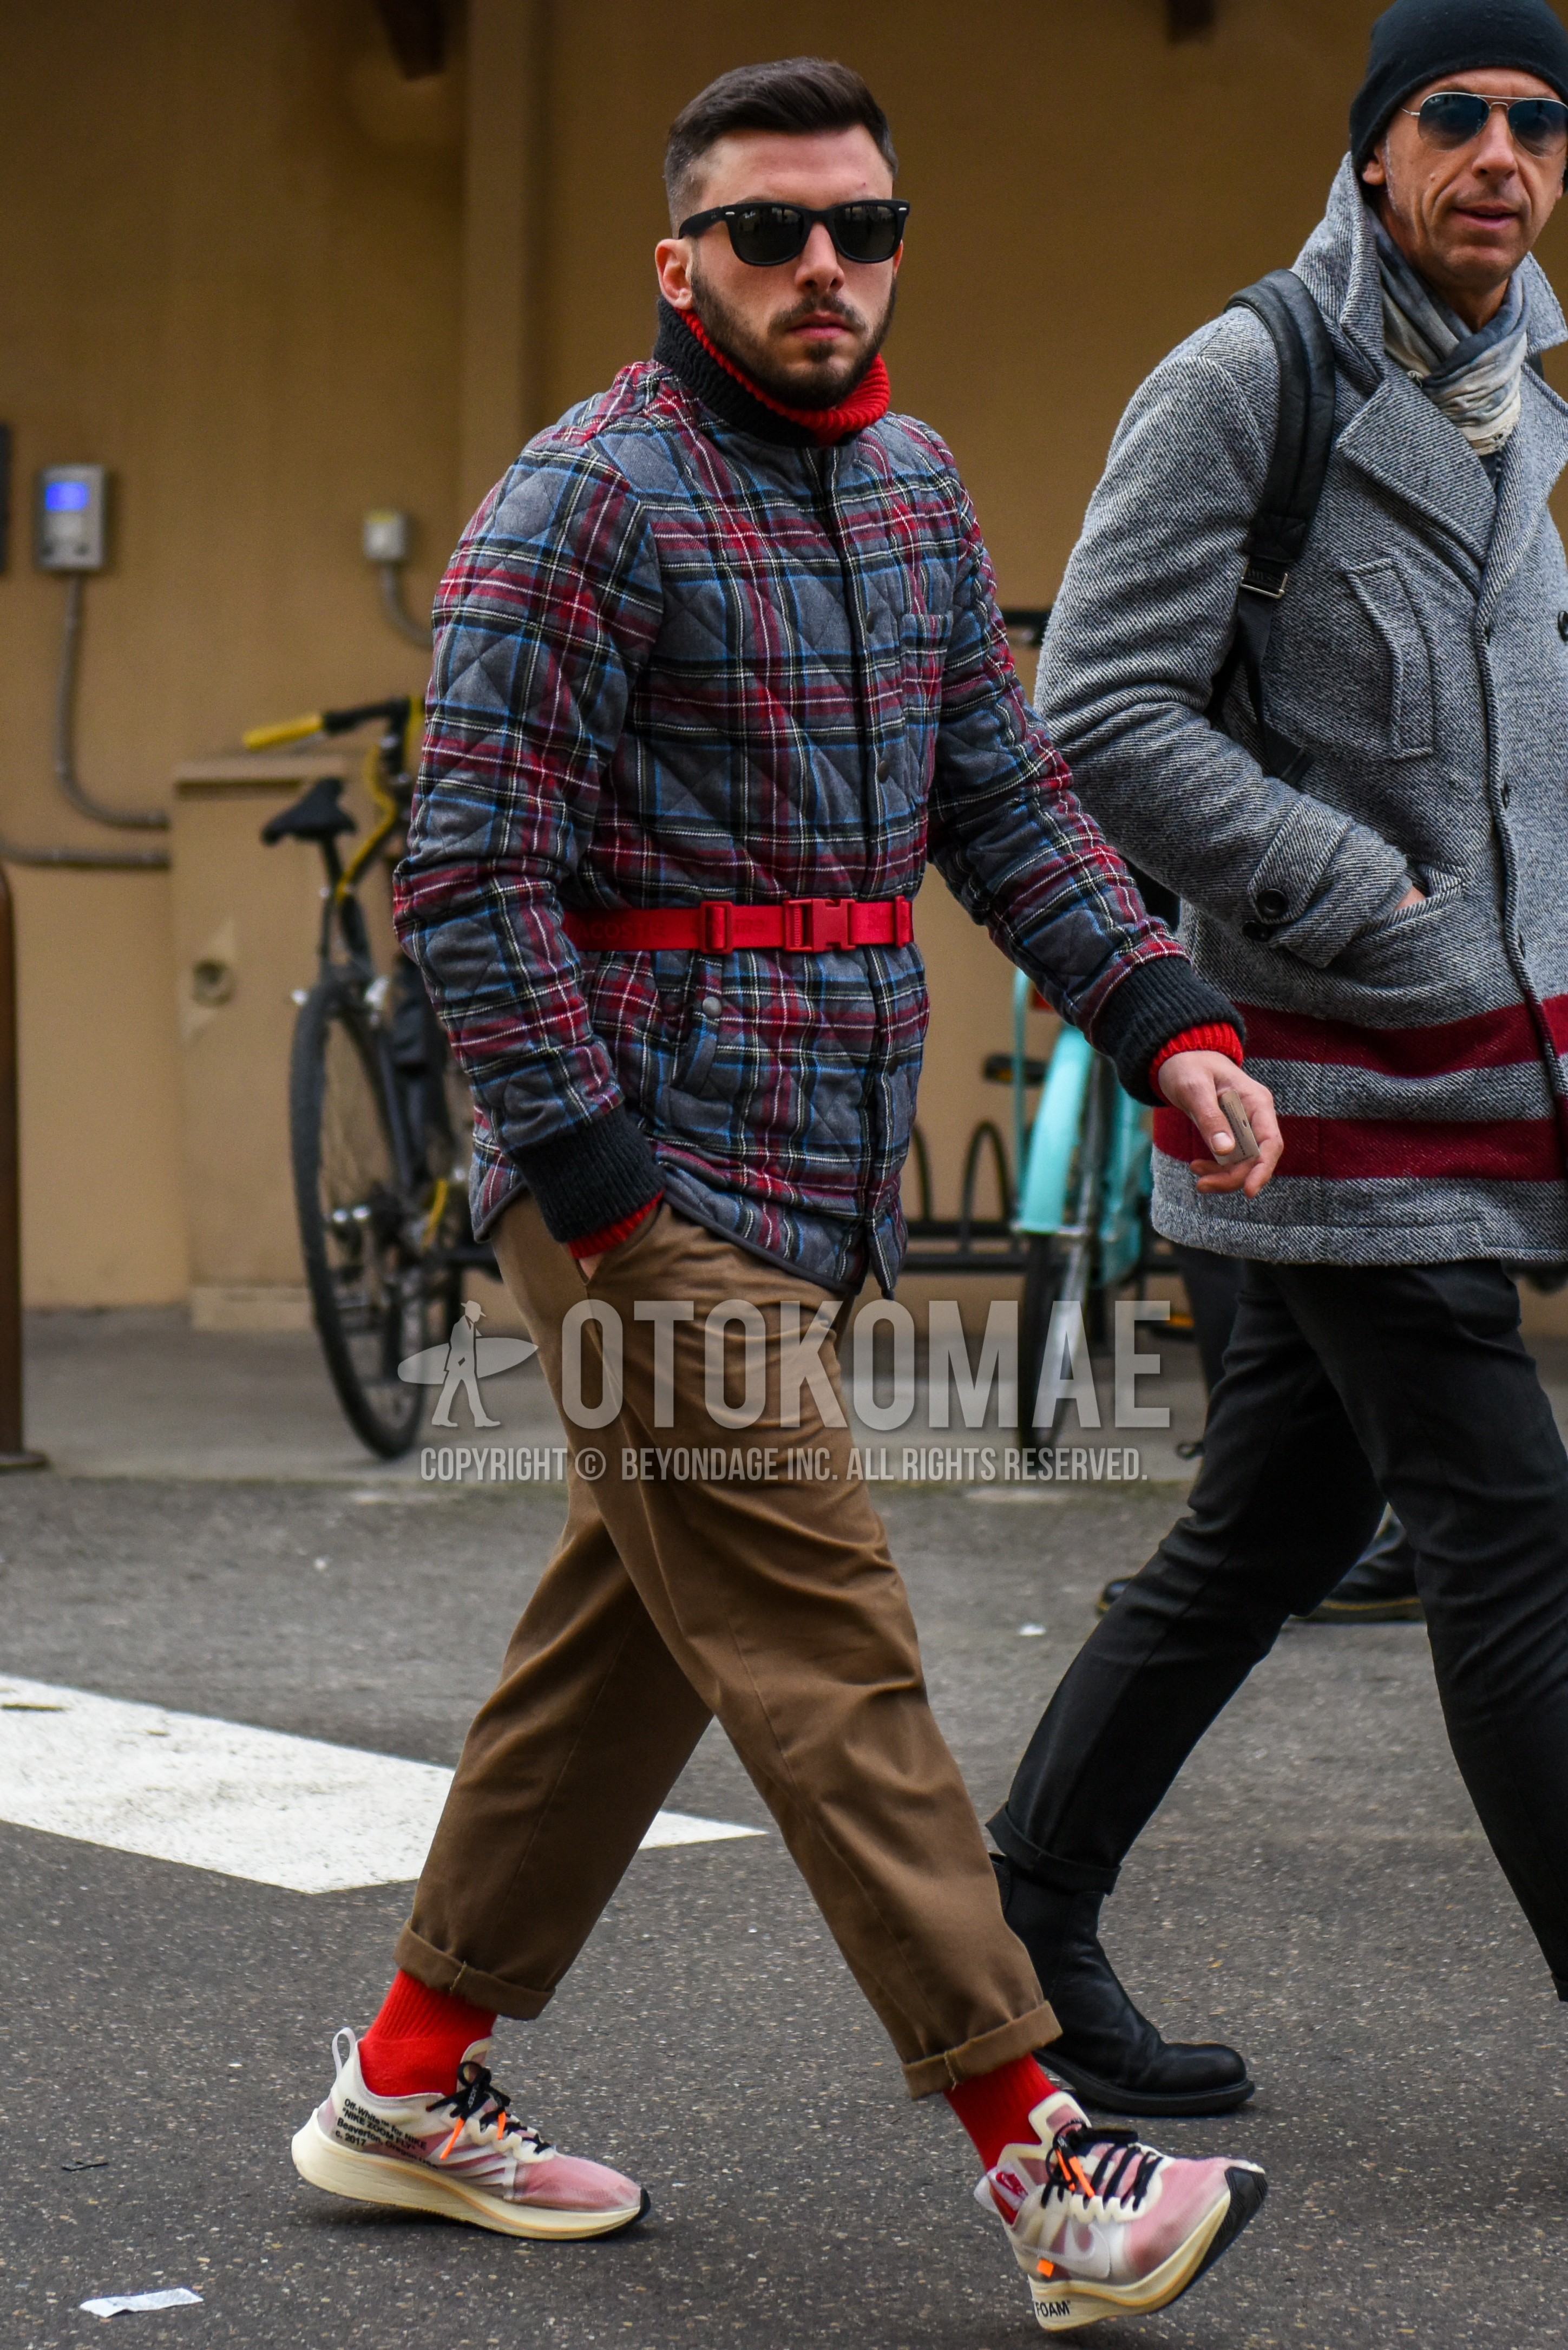 Men's winter outfit with black plain sunglasses, gray red check quilted jacket, brown plain chinos, red plain socks, white low-cut sneakers.